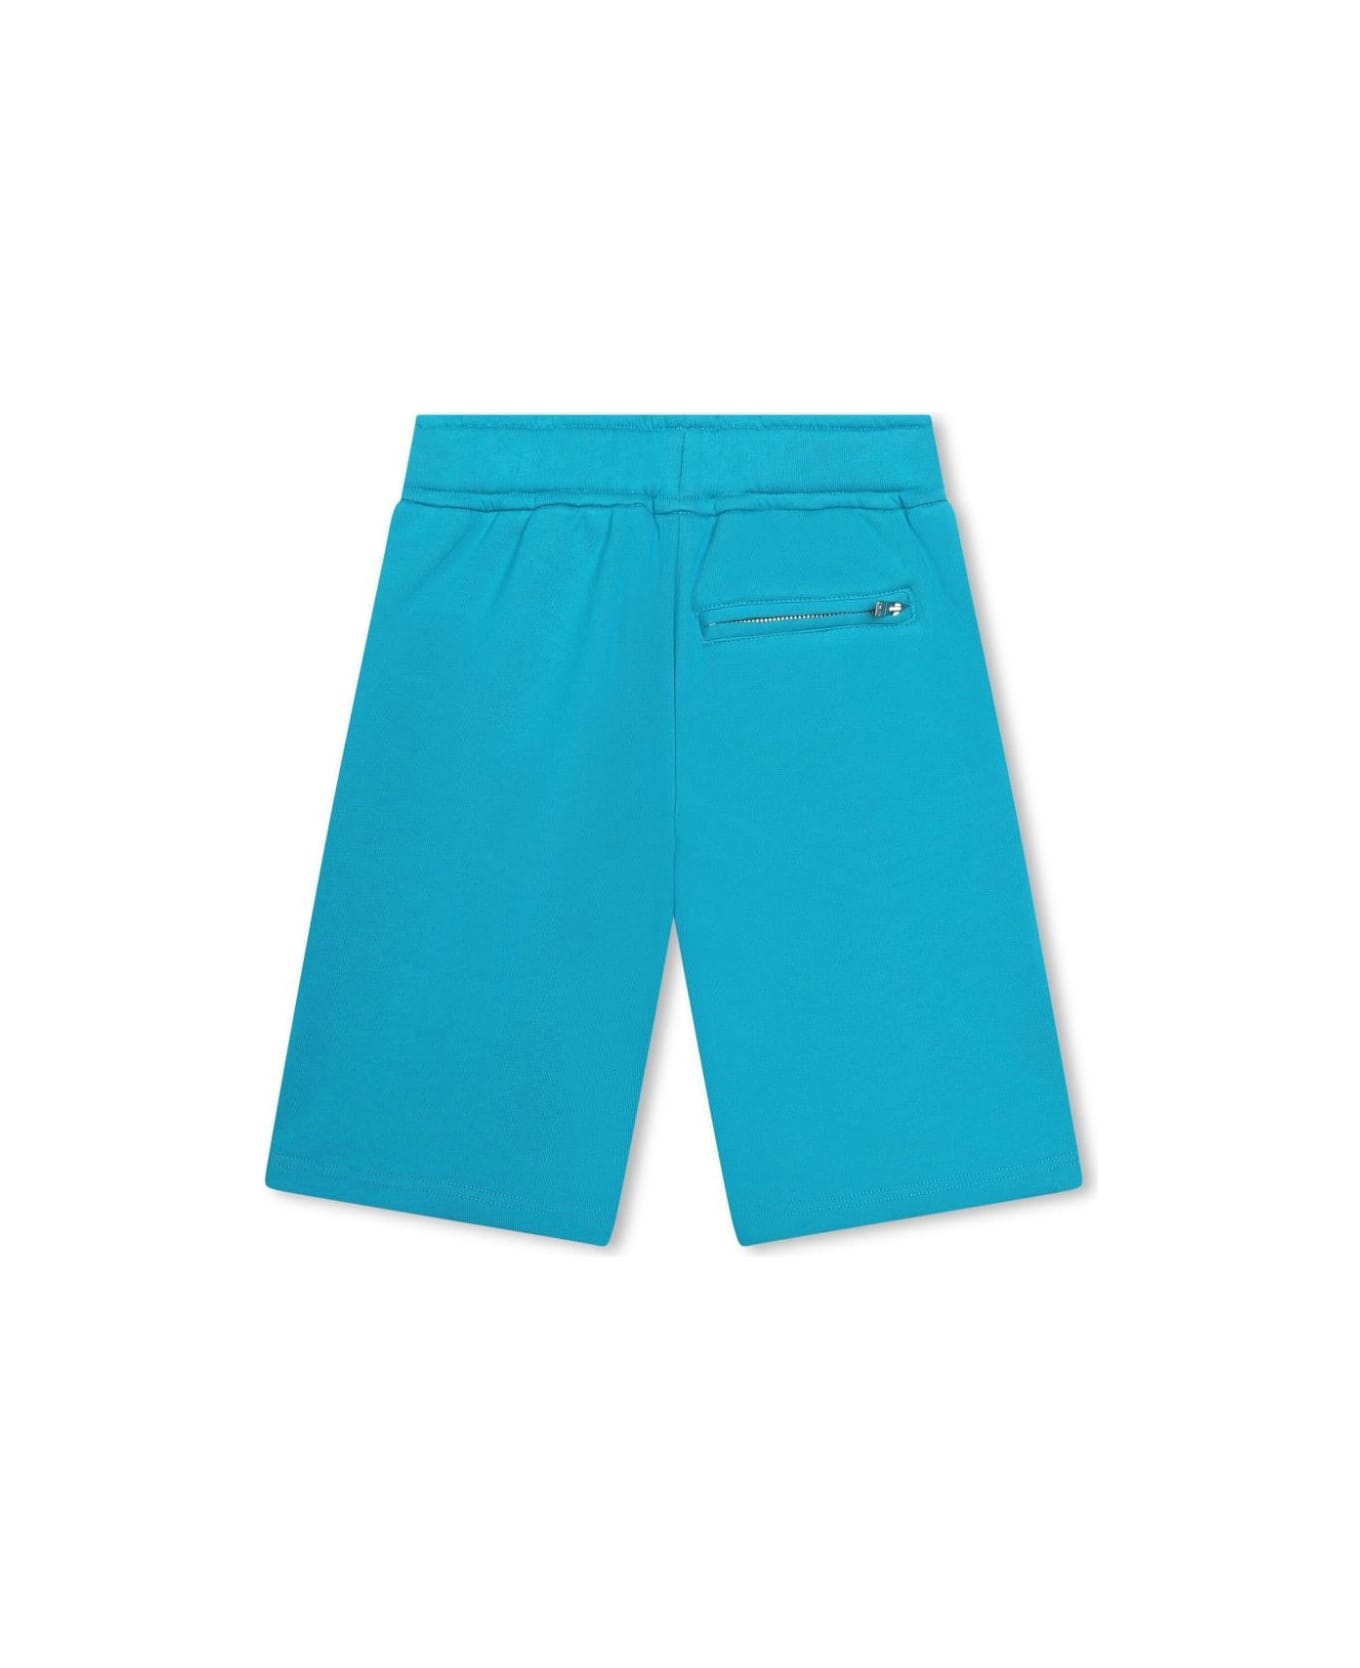 Lanvin Turquoise Shorts With Logo And 'curb' Motif - Turchese